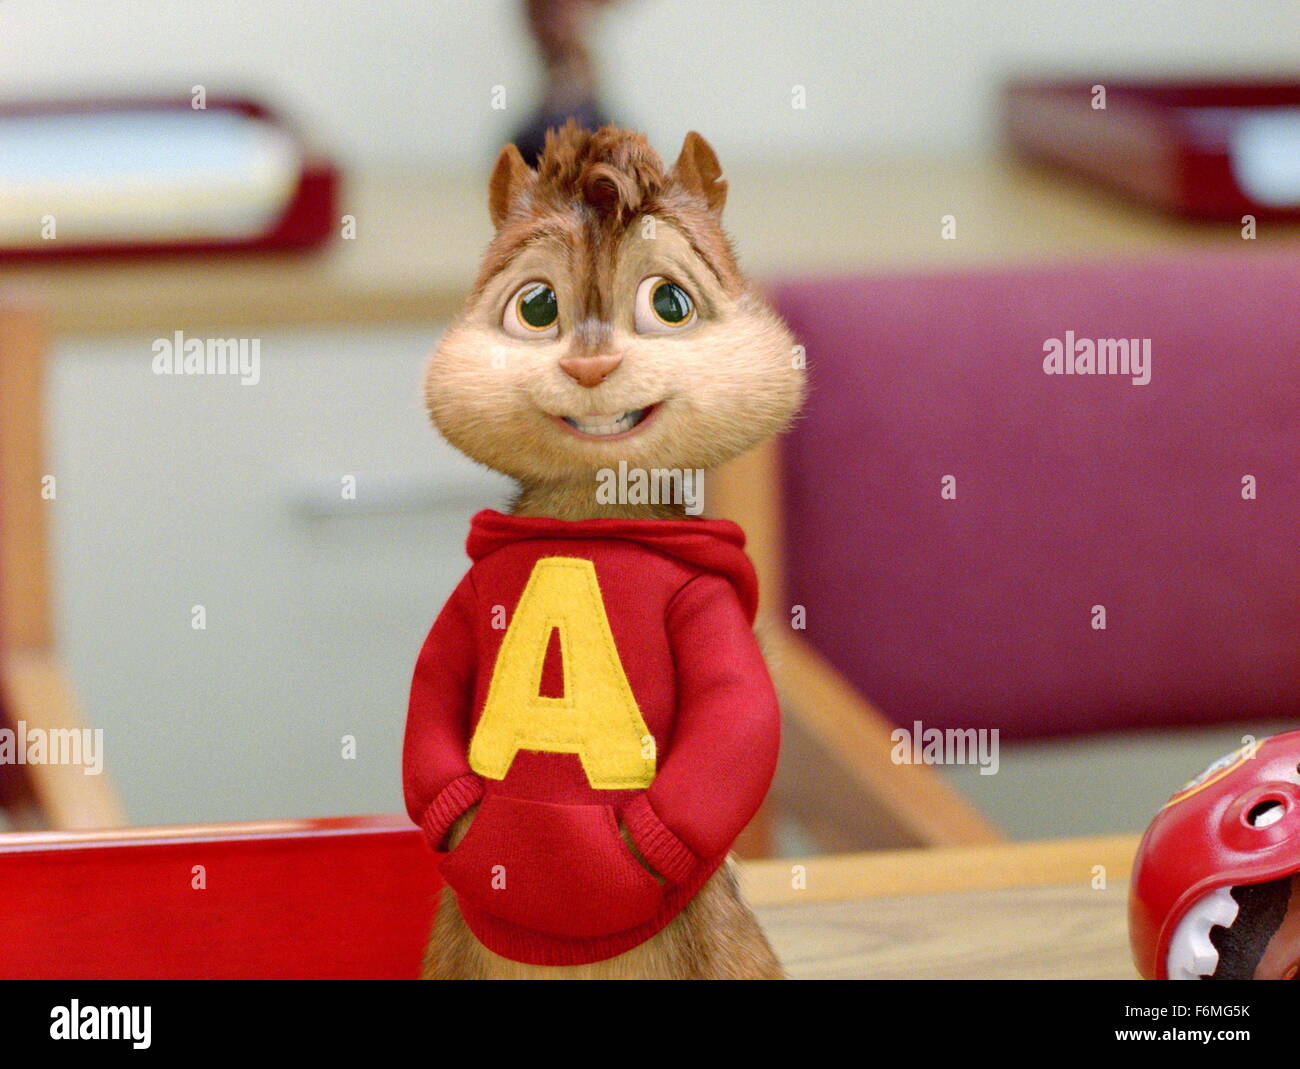 RELEASE DATE: December 23, 2009. MOVIE TITLE: Alvin and the Chipmunks.  STUDIO: Regency Enterprises. PLOT: Pop sensations Alvin, Simon and Theodore  end up in the care of Dave Seville's twenty-something nephew Toby.